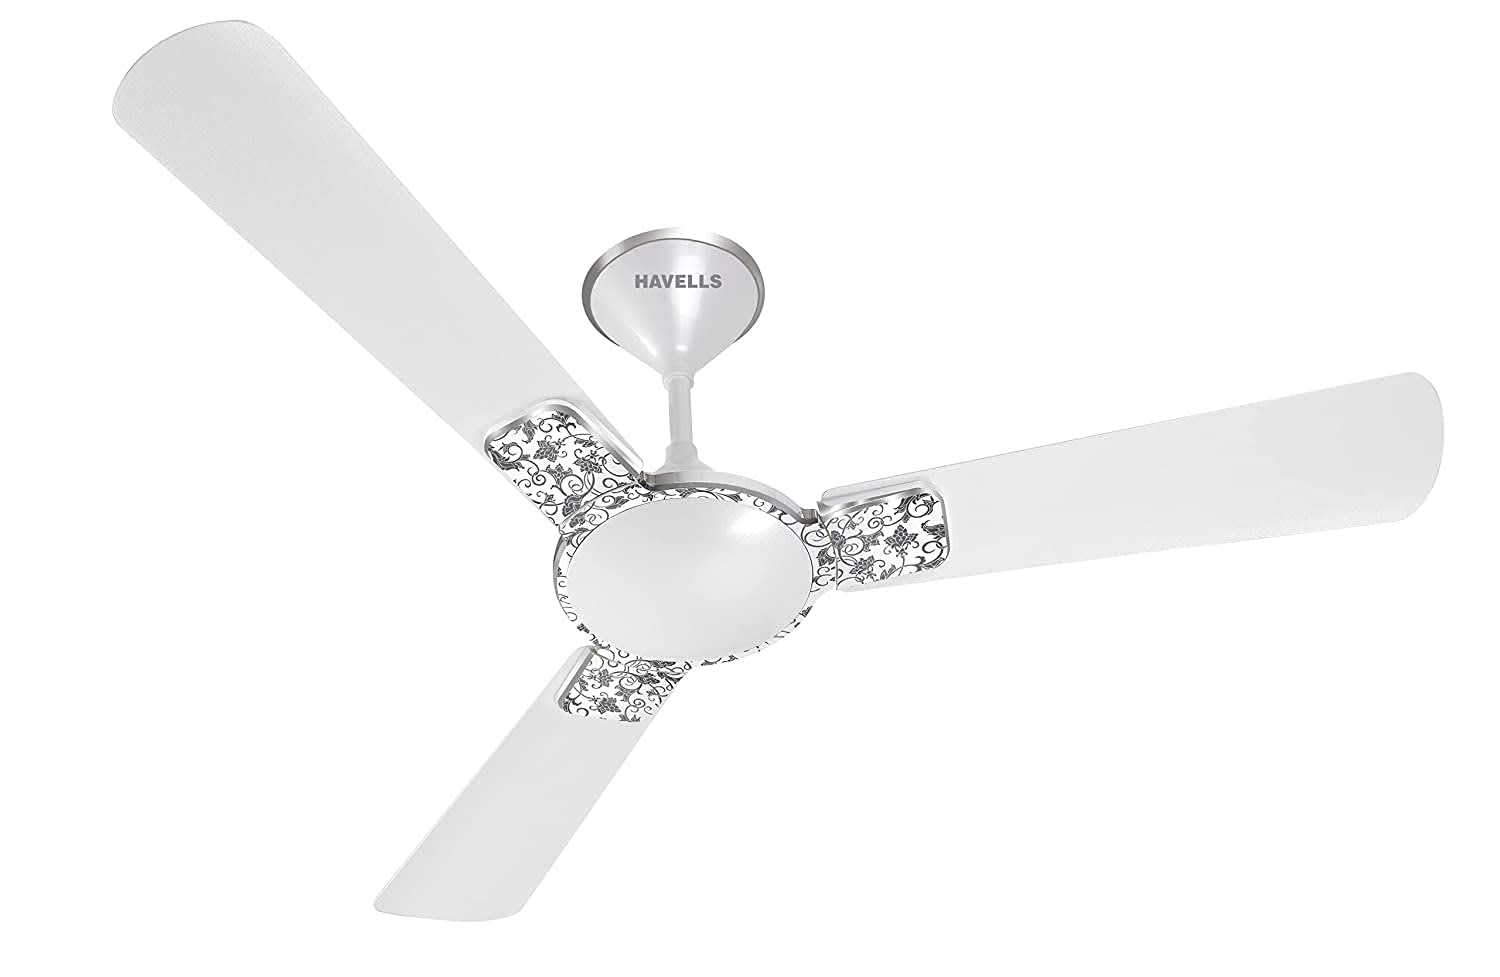 Havells Enticer Art ES 1200mm Ceiling Fan Pearl White Chrome